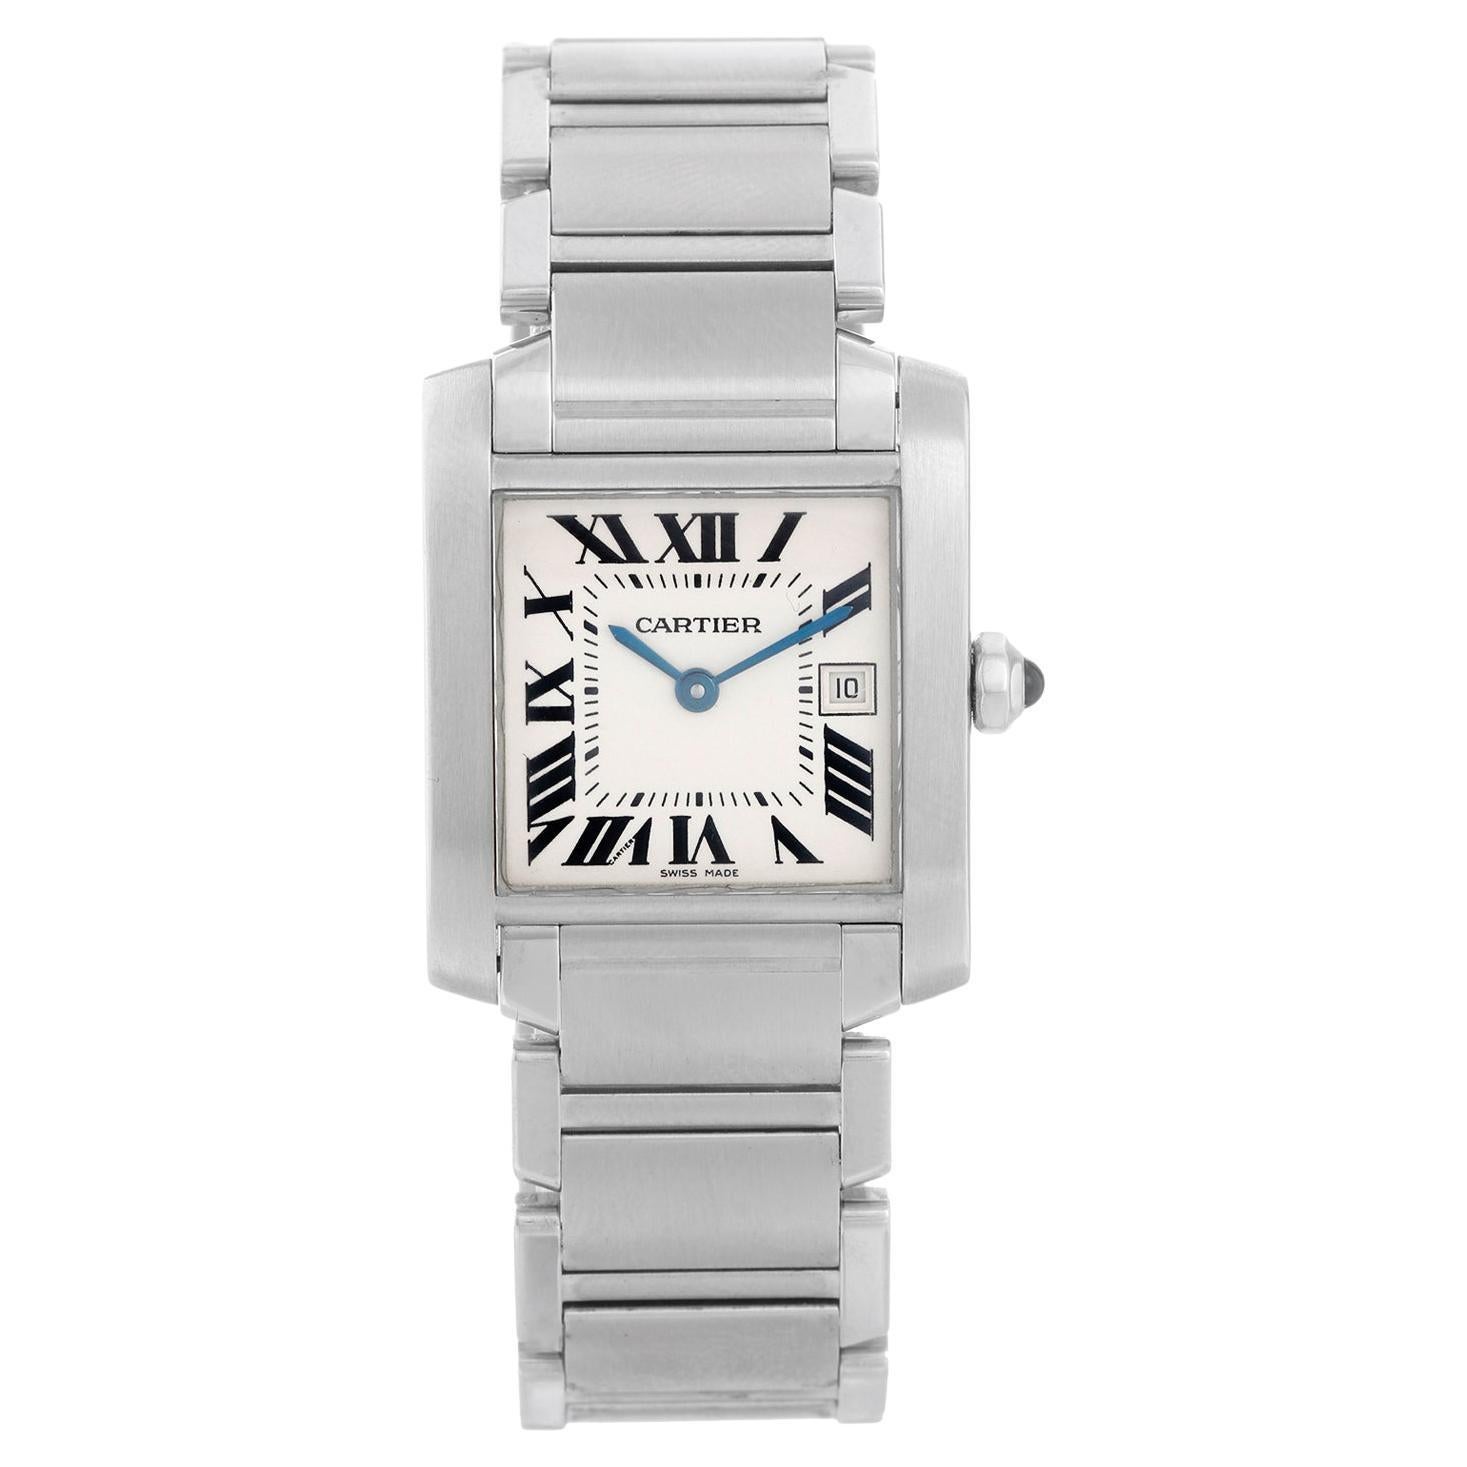 Cartier Tank Francaise Midsize Stainless Steel Watch 2465